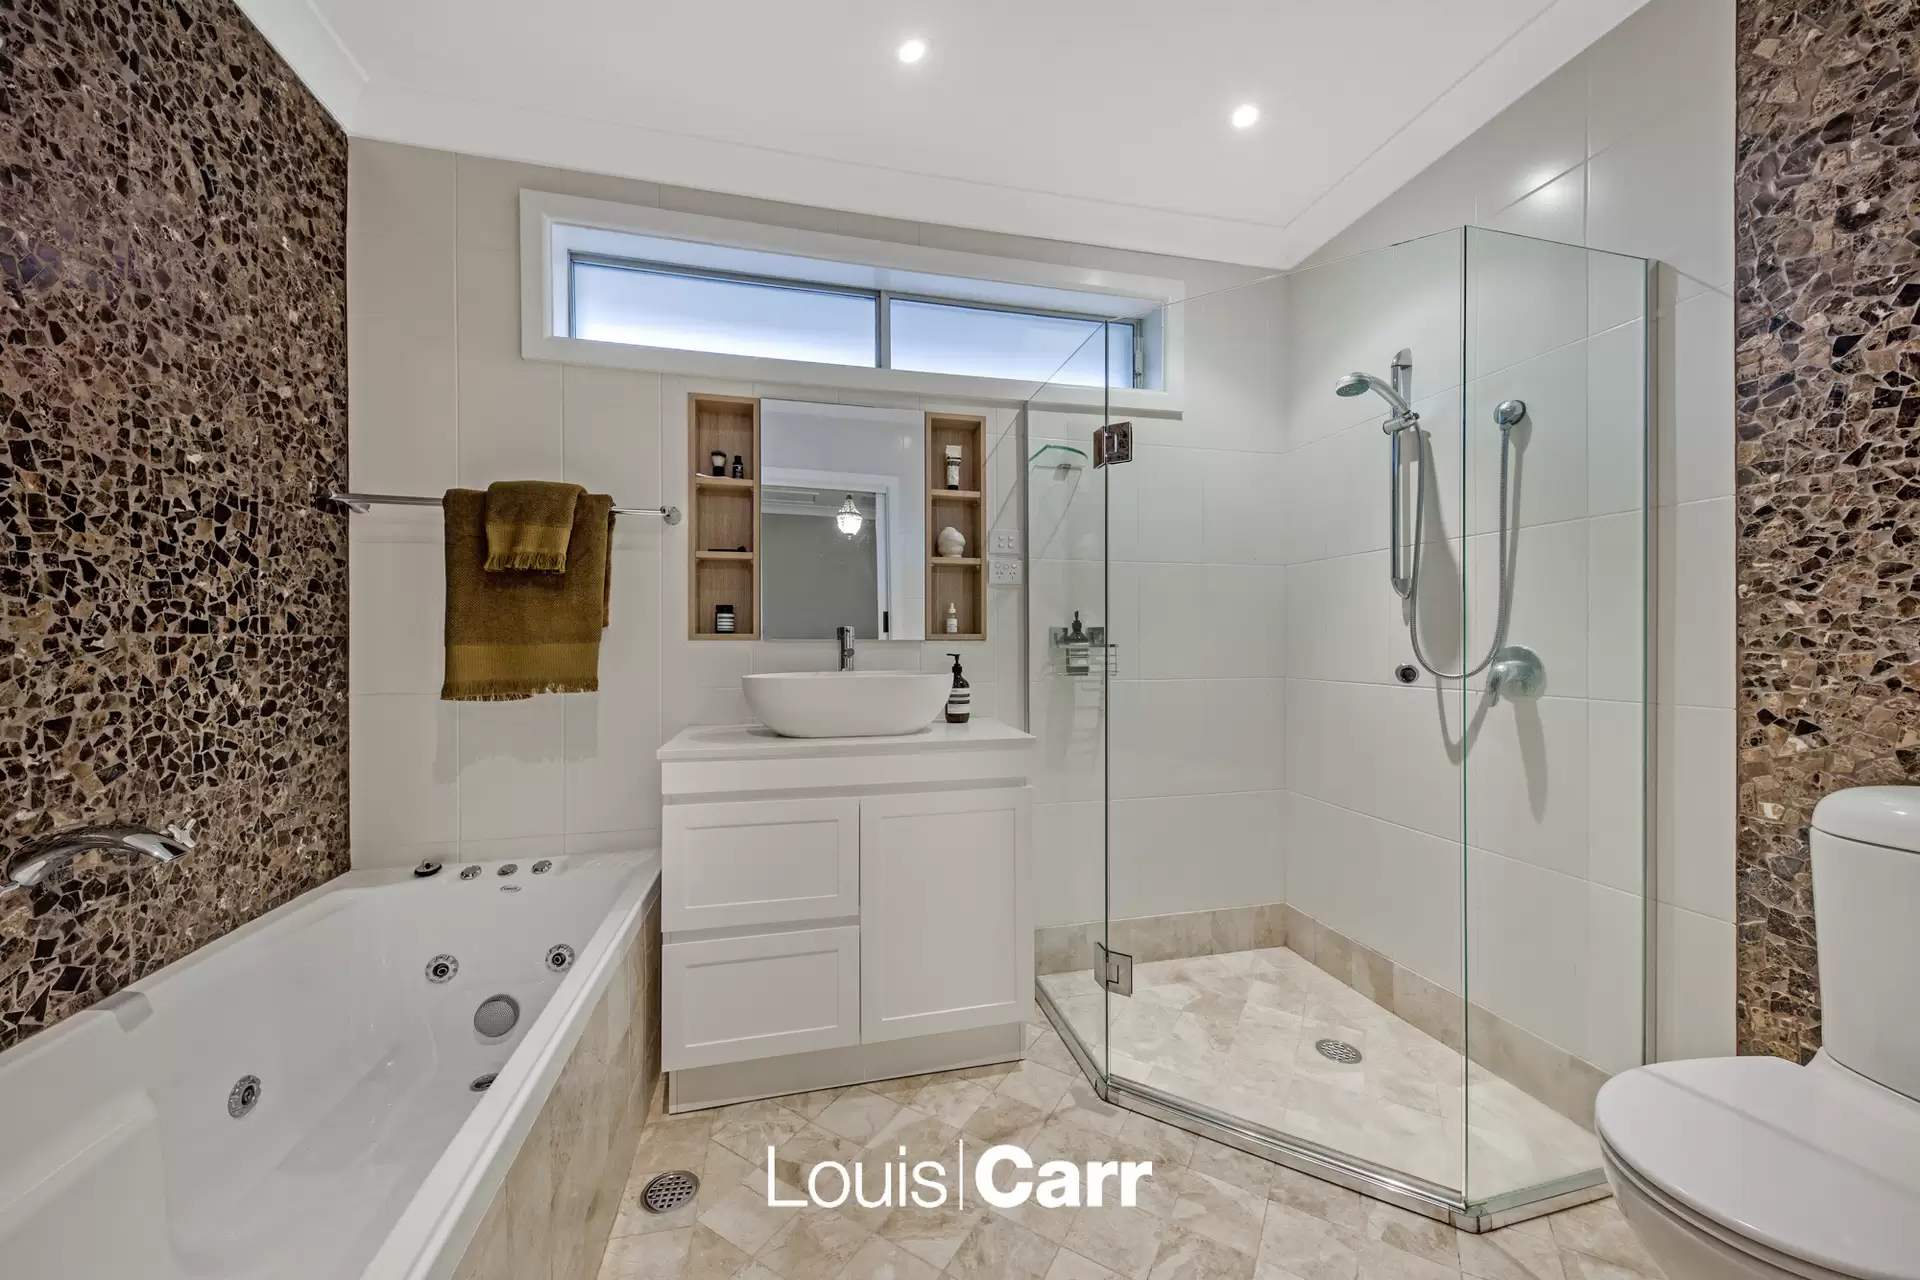 Photo #16: 47 Cambewarra Avenue, Castle Hill - For Sale by Louis Carr Real Estate